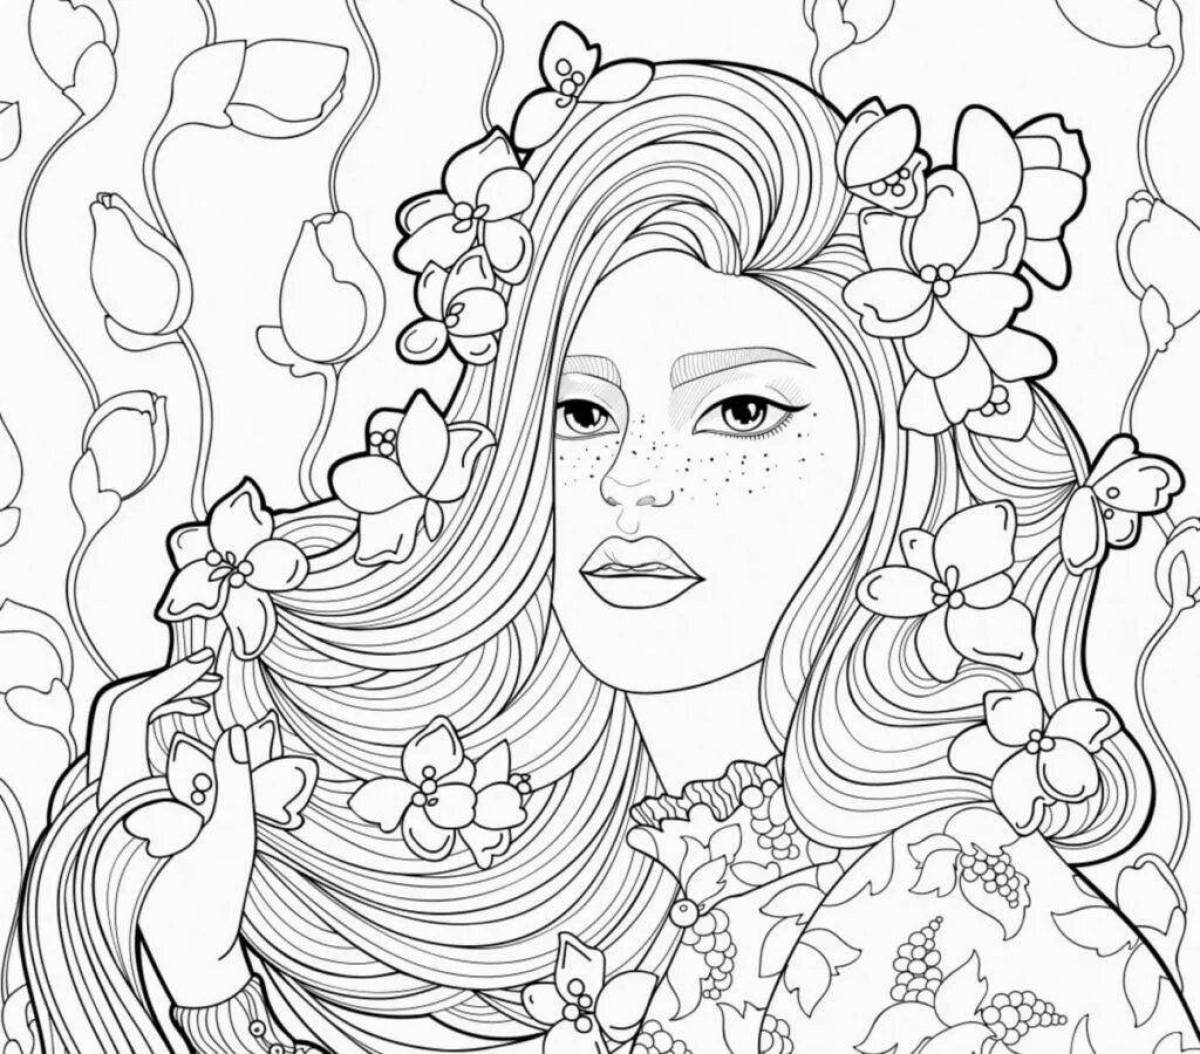 Divine anti-stress coloring book for girls 9-10 years old